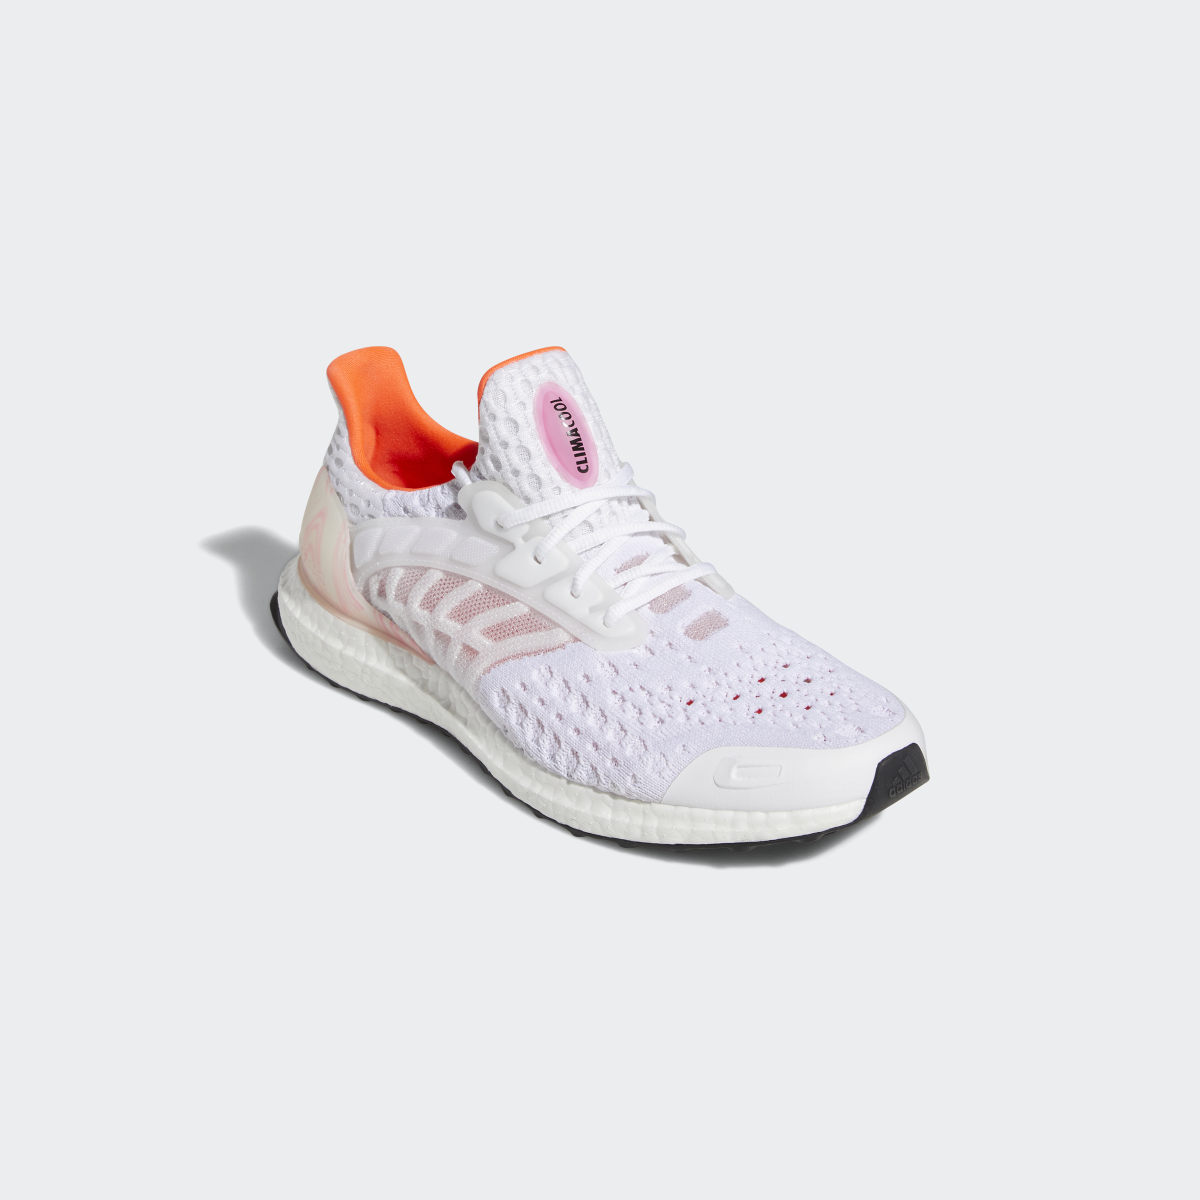 Adidas Chaussure Ultraboost CC_2 DNA Climacool Running Sportswear Lifestyle. 8